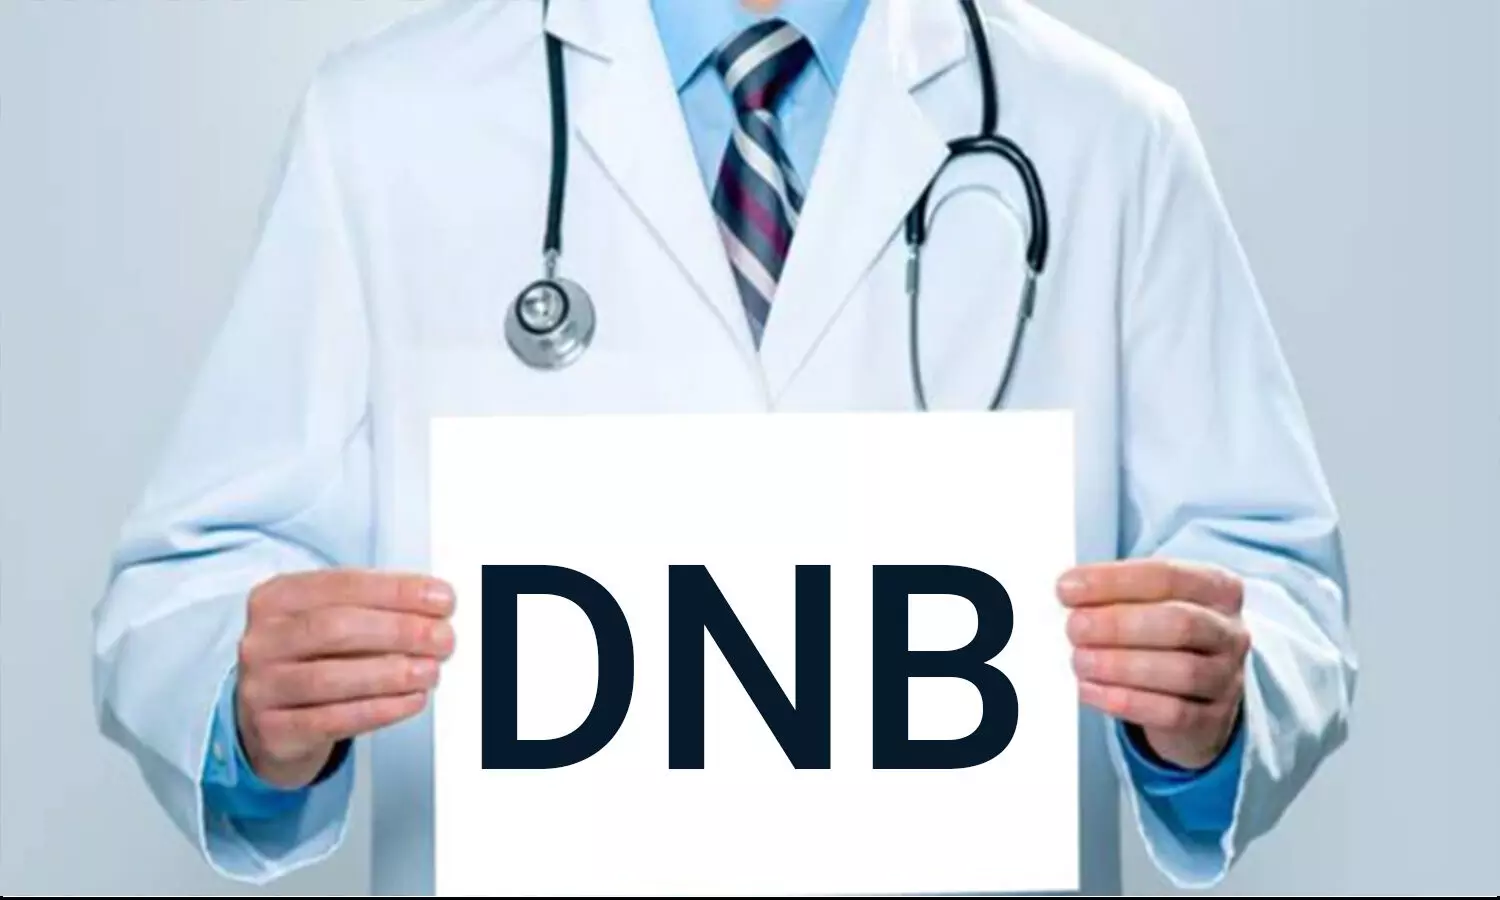 DNB Post MBBS, Post Diploma Counselling Begins: 4925 seats up for grabs, see breakup